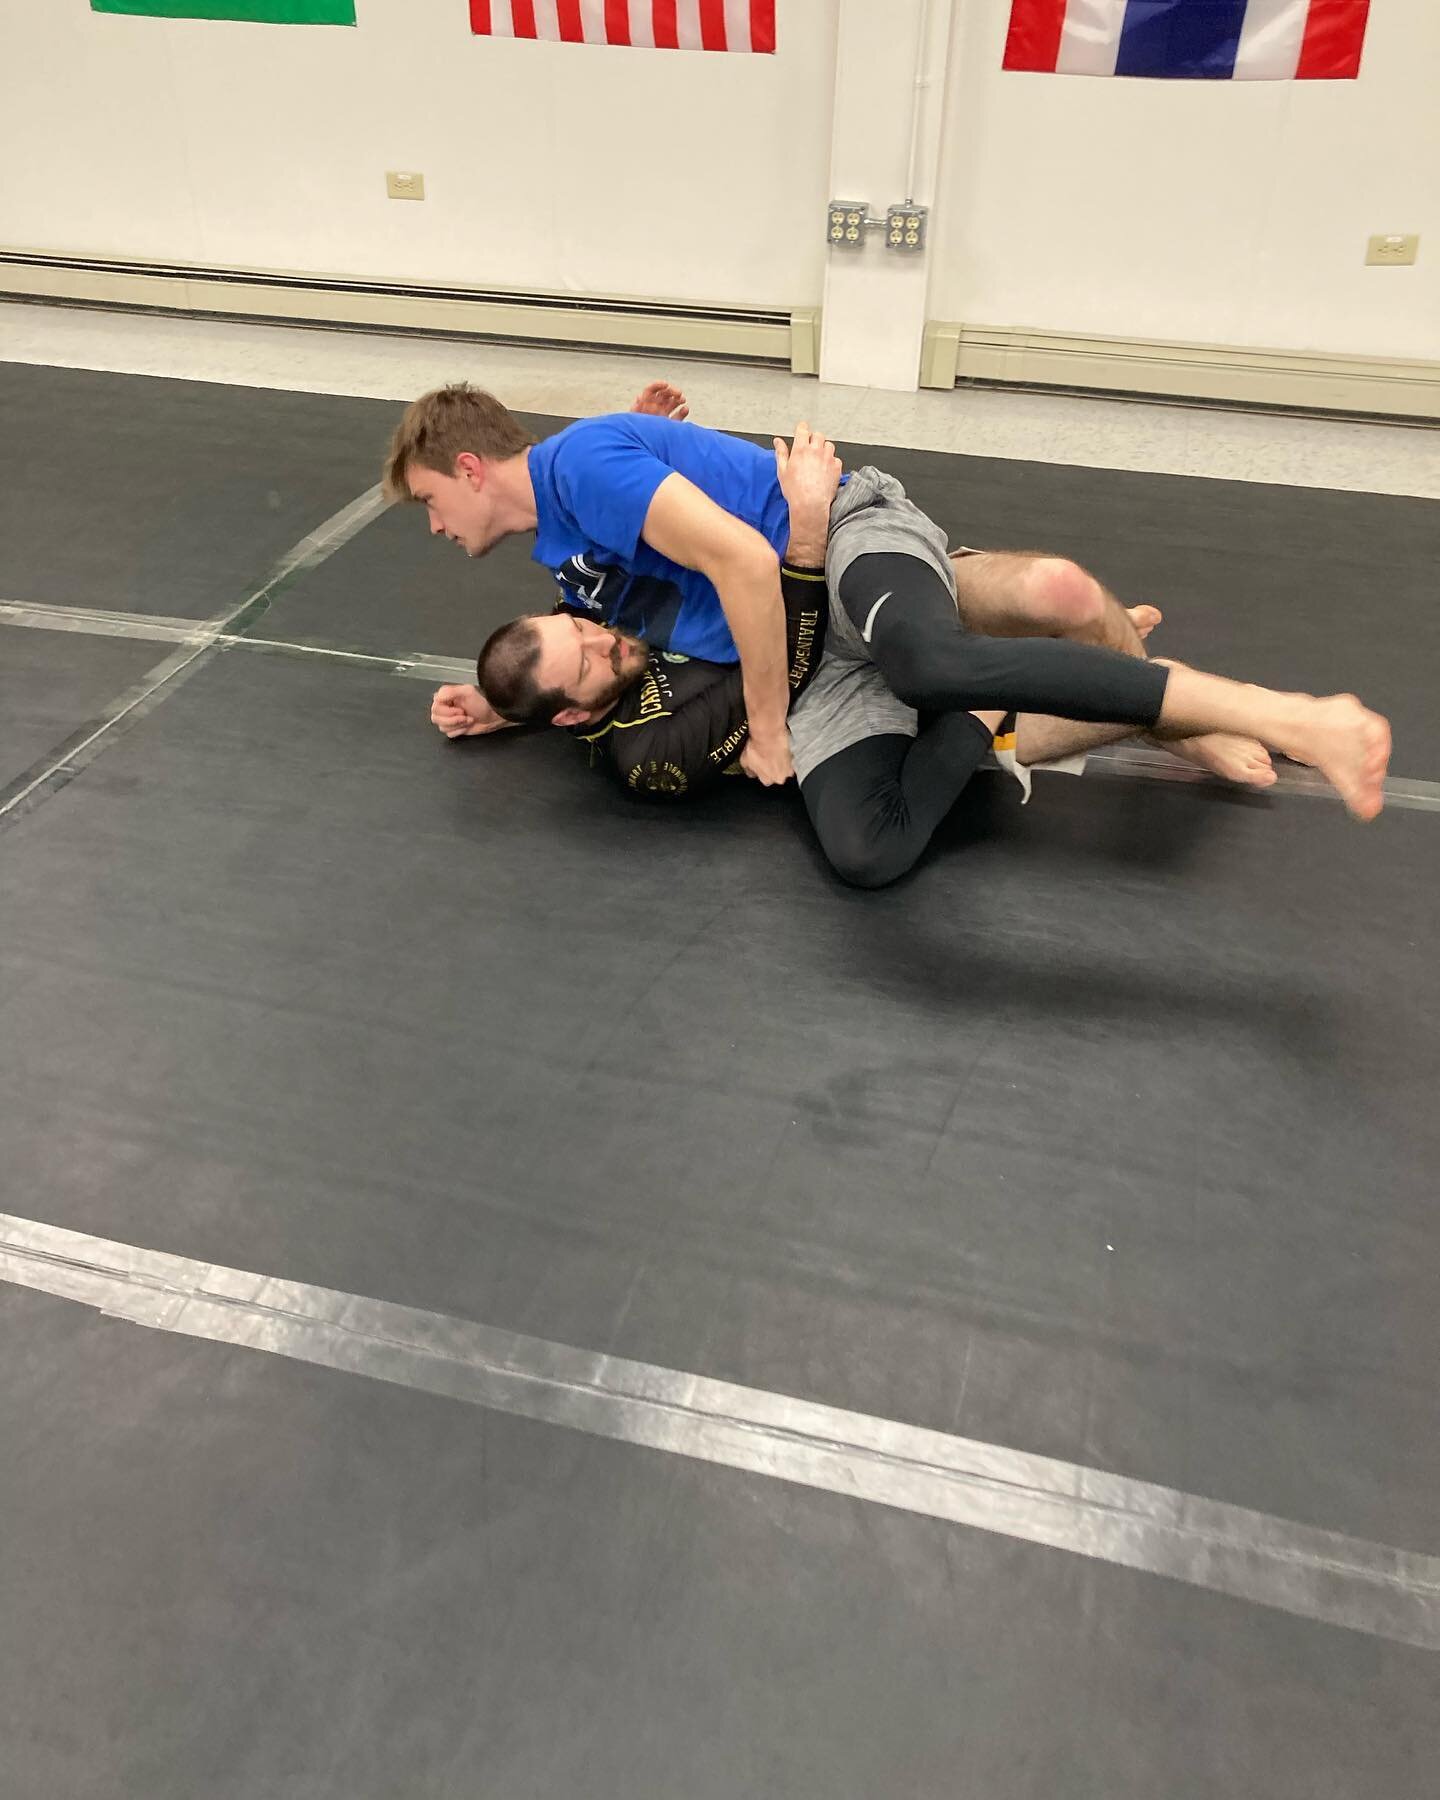 Just a bunch of warriors. Passing Half-Guard. Here we see knee slices, back steps, and then combining both against skilled opponents.